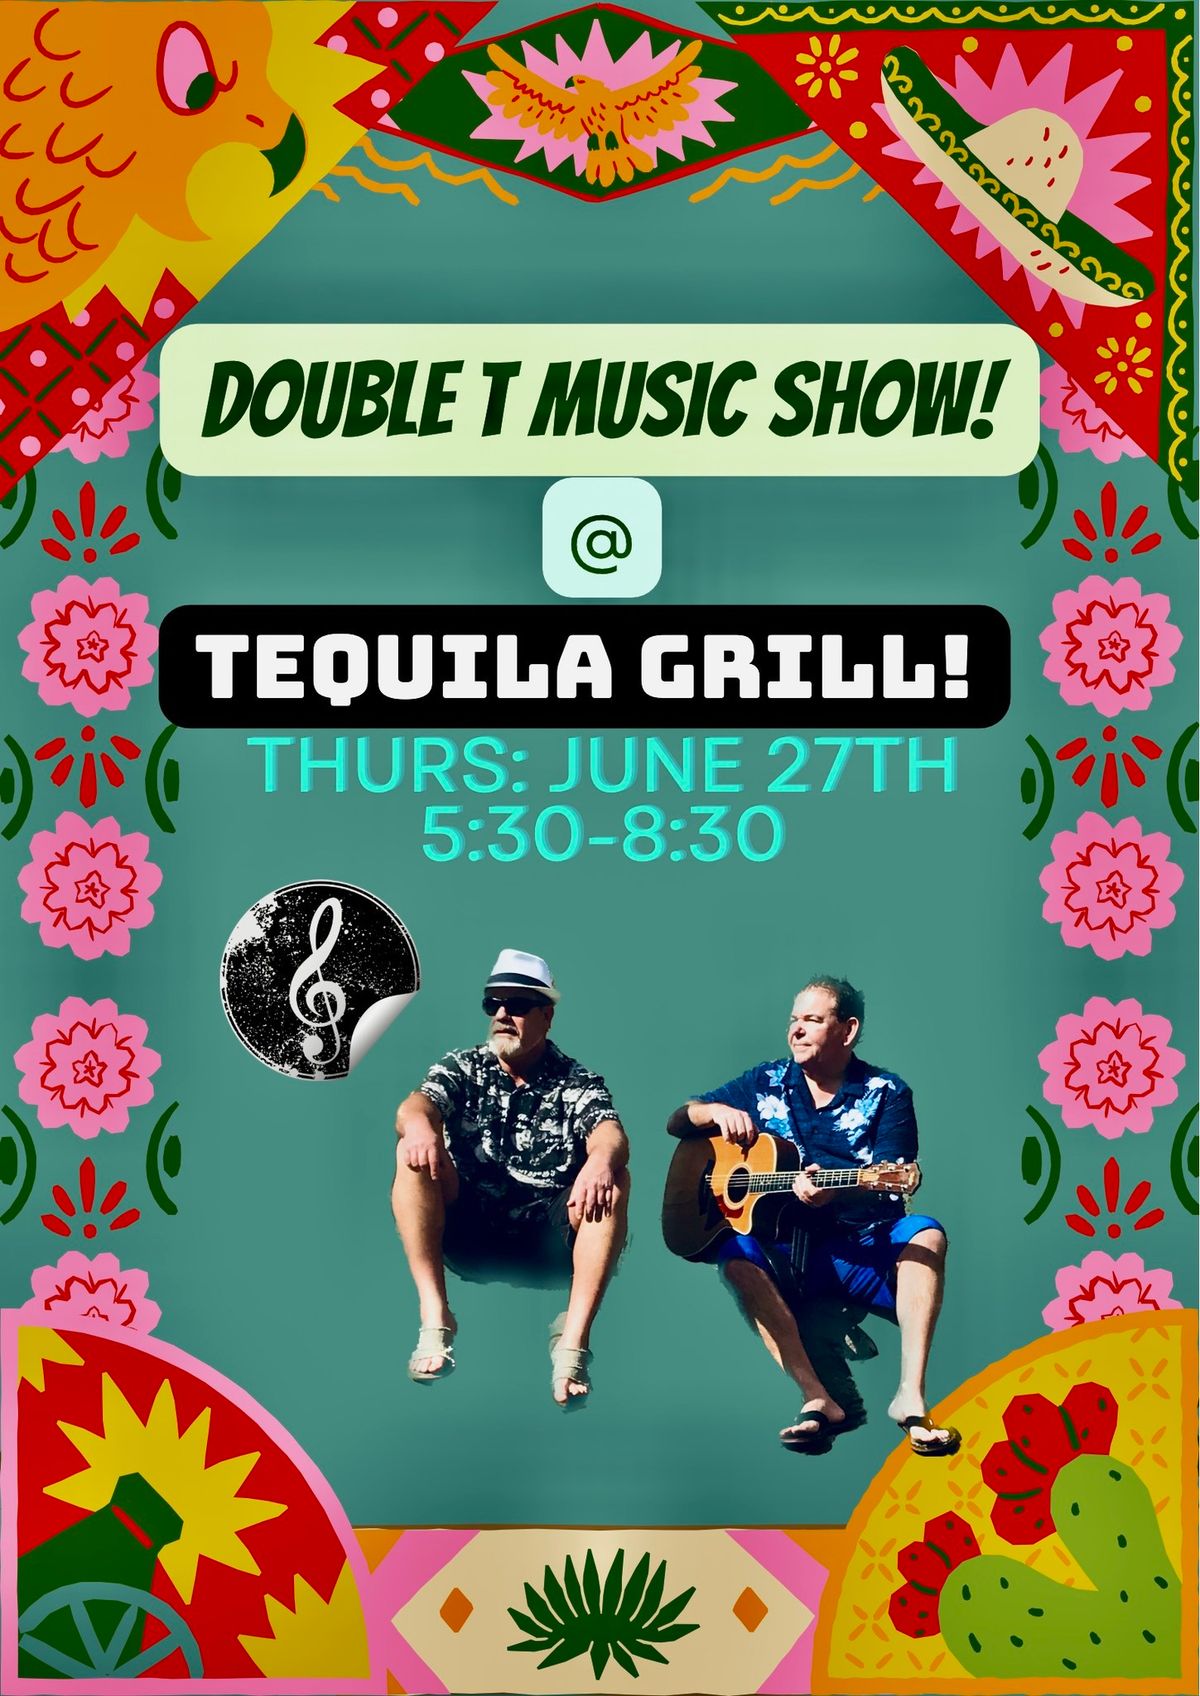 Double T MUSIC SHOW! Back @ Tequila Grill for an incredible evening of food, drink and songs!